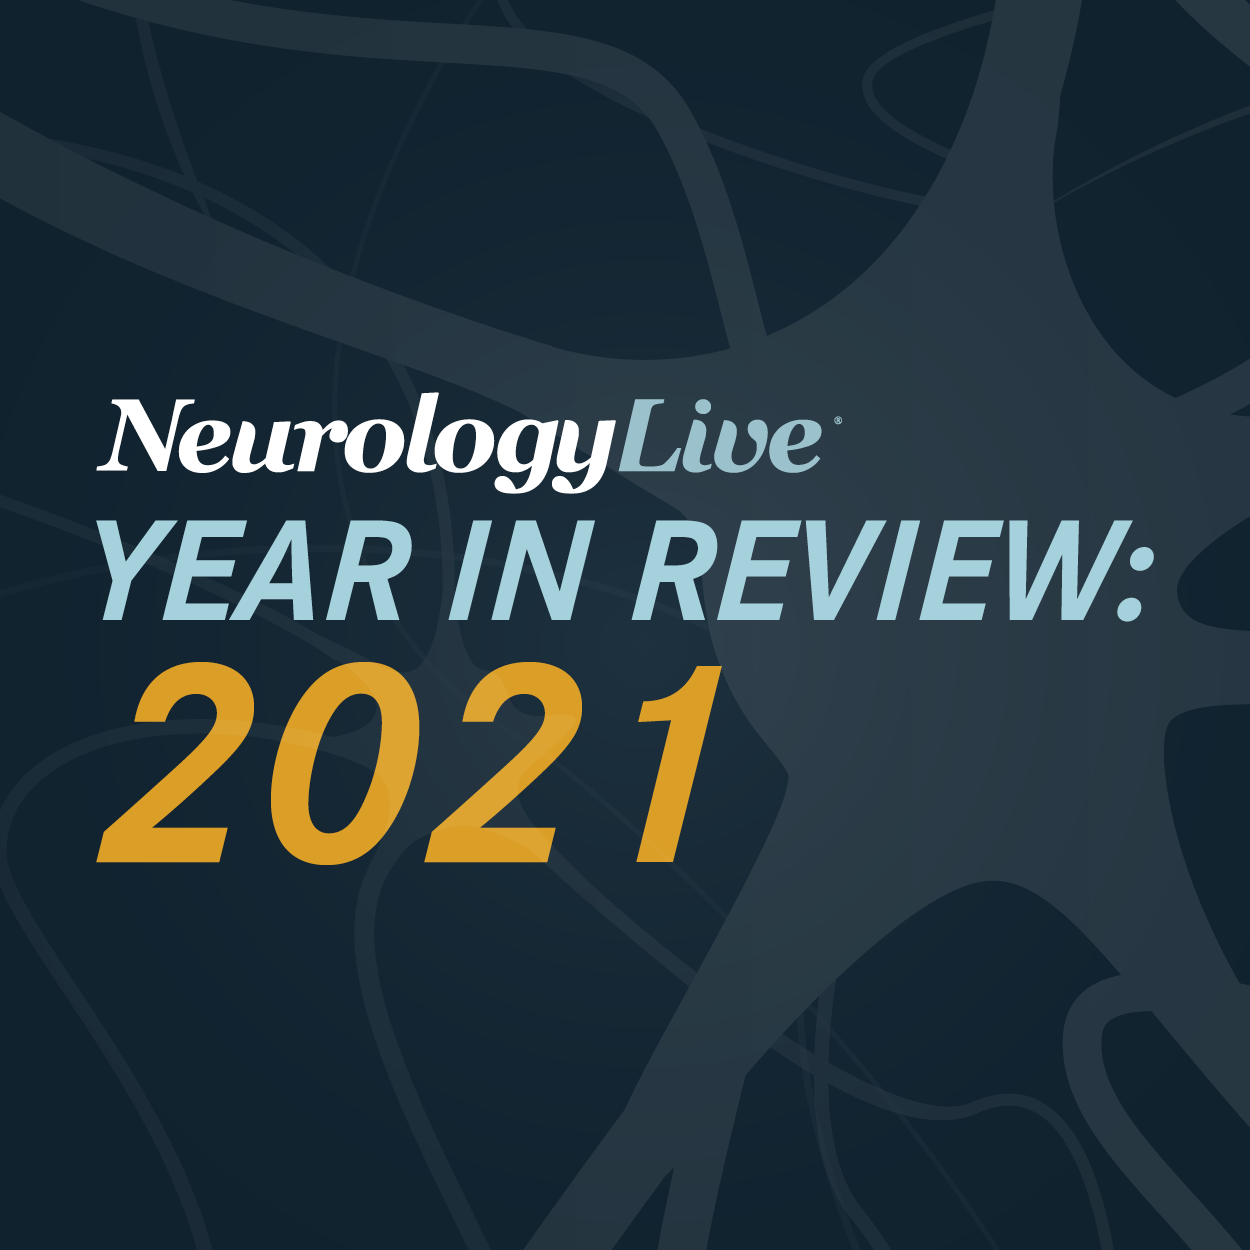 NeurologyLive® Year in Review 2021: Top Video Series